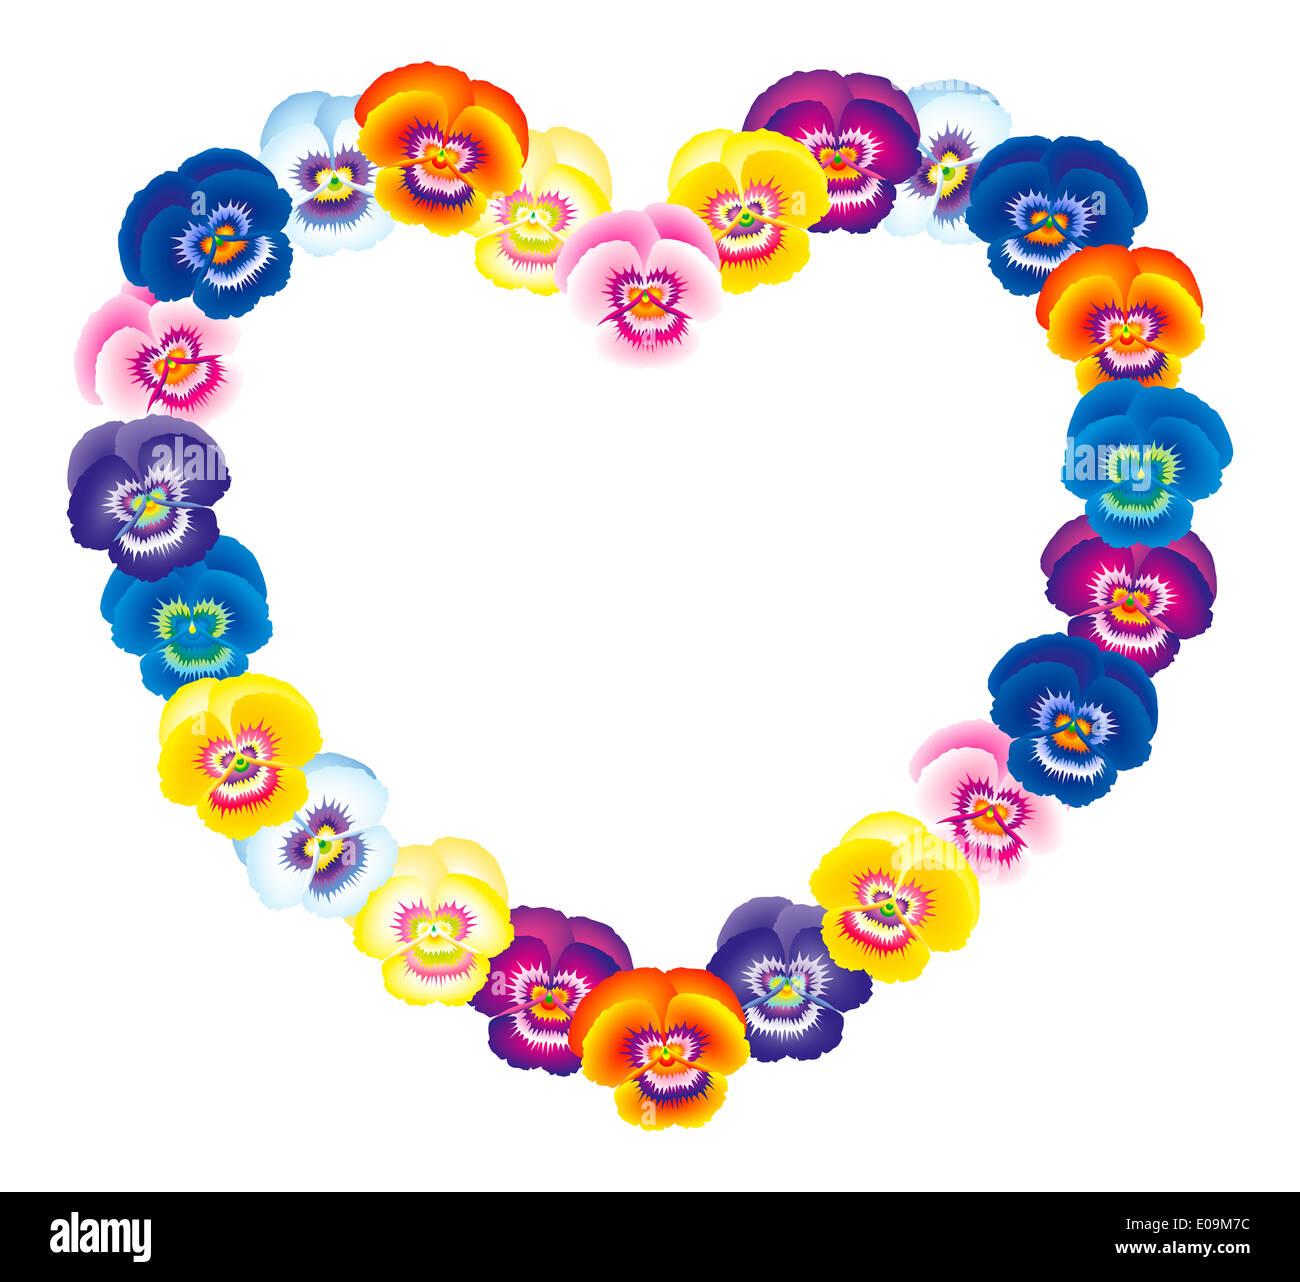 Illustration of a colorful pansy heart bouquet. Stock Photo